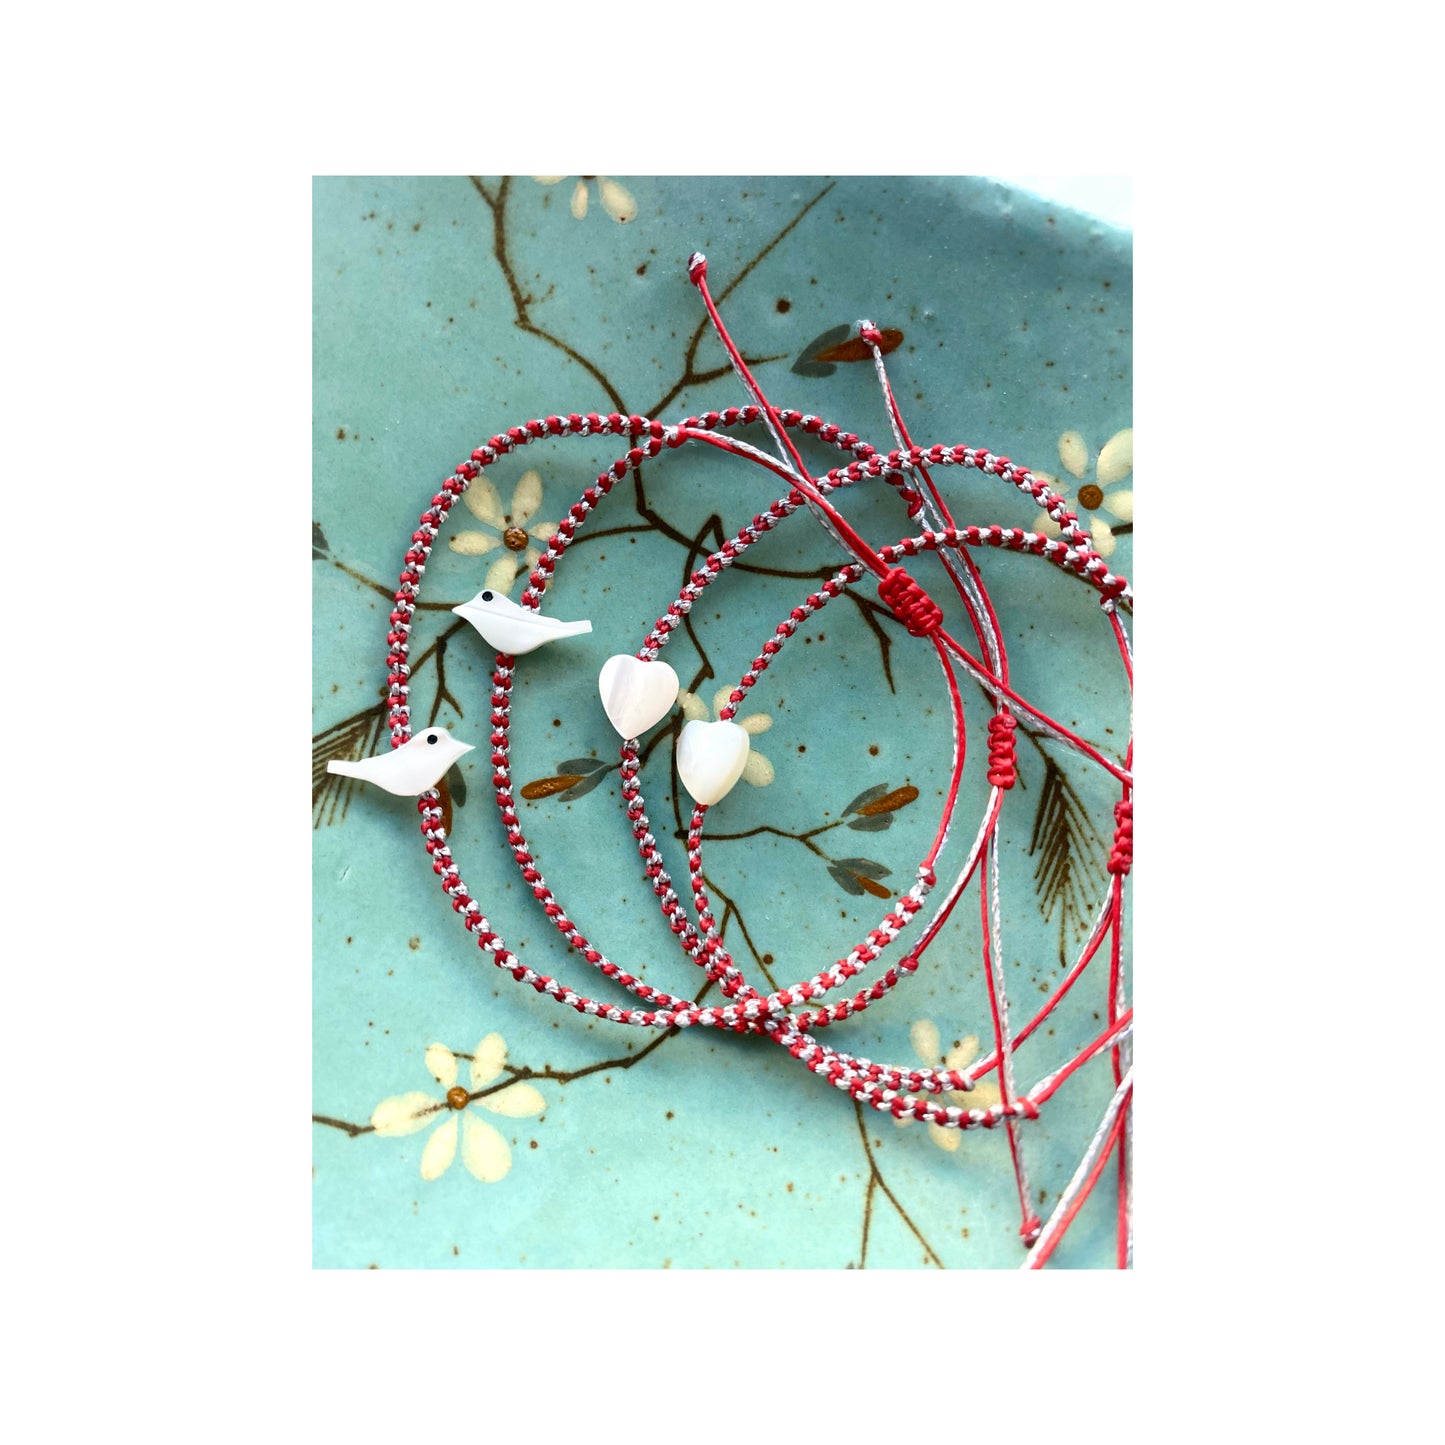 Macrame “Spring” bracelet with tiny bird | threads and mother of pearl